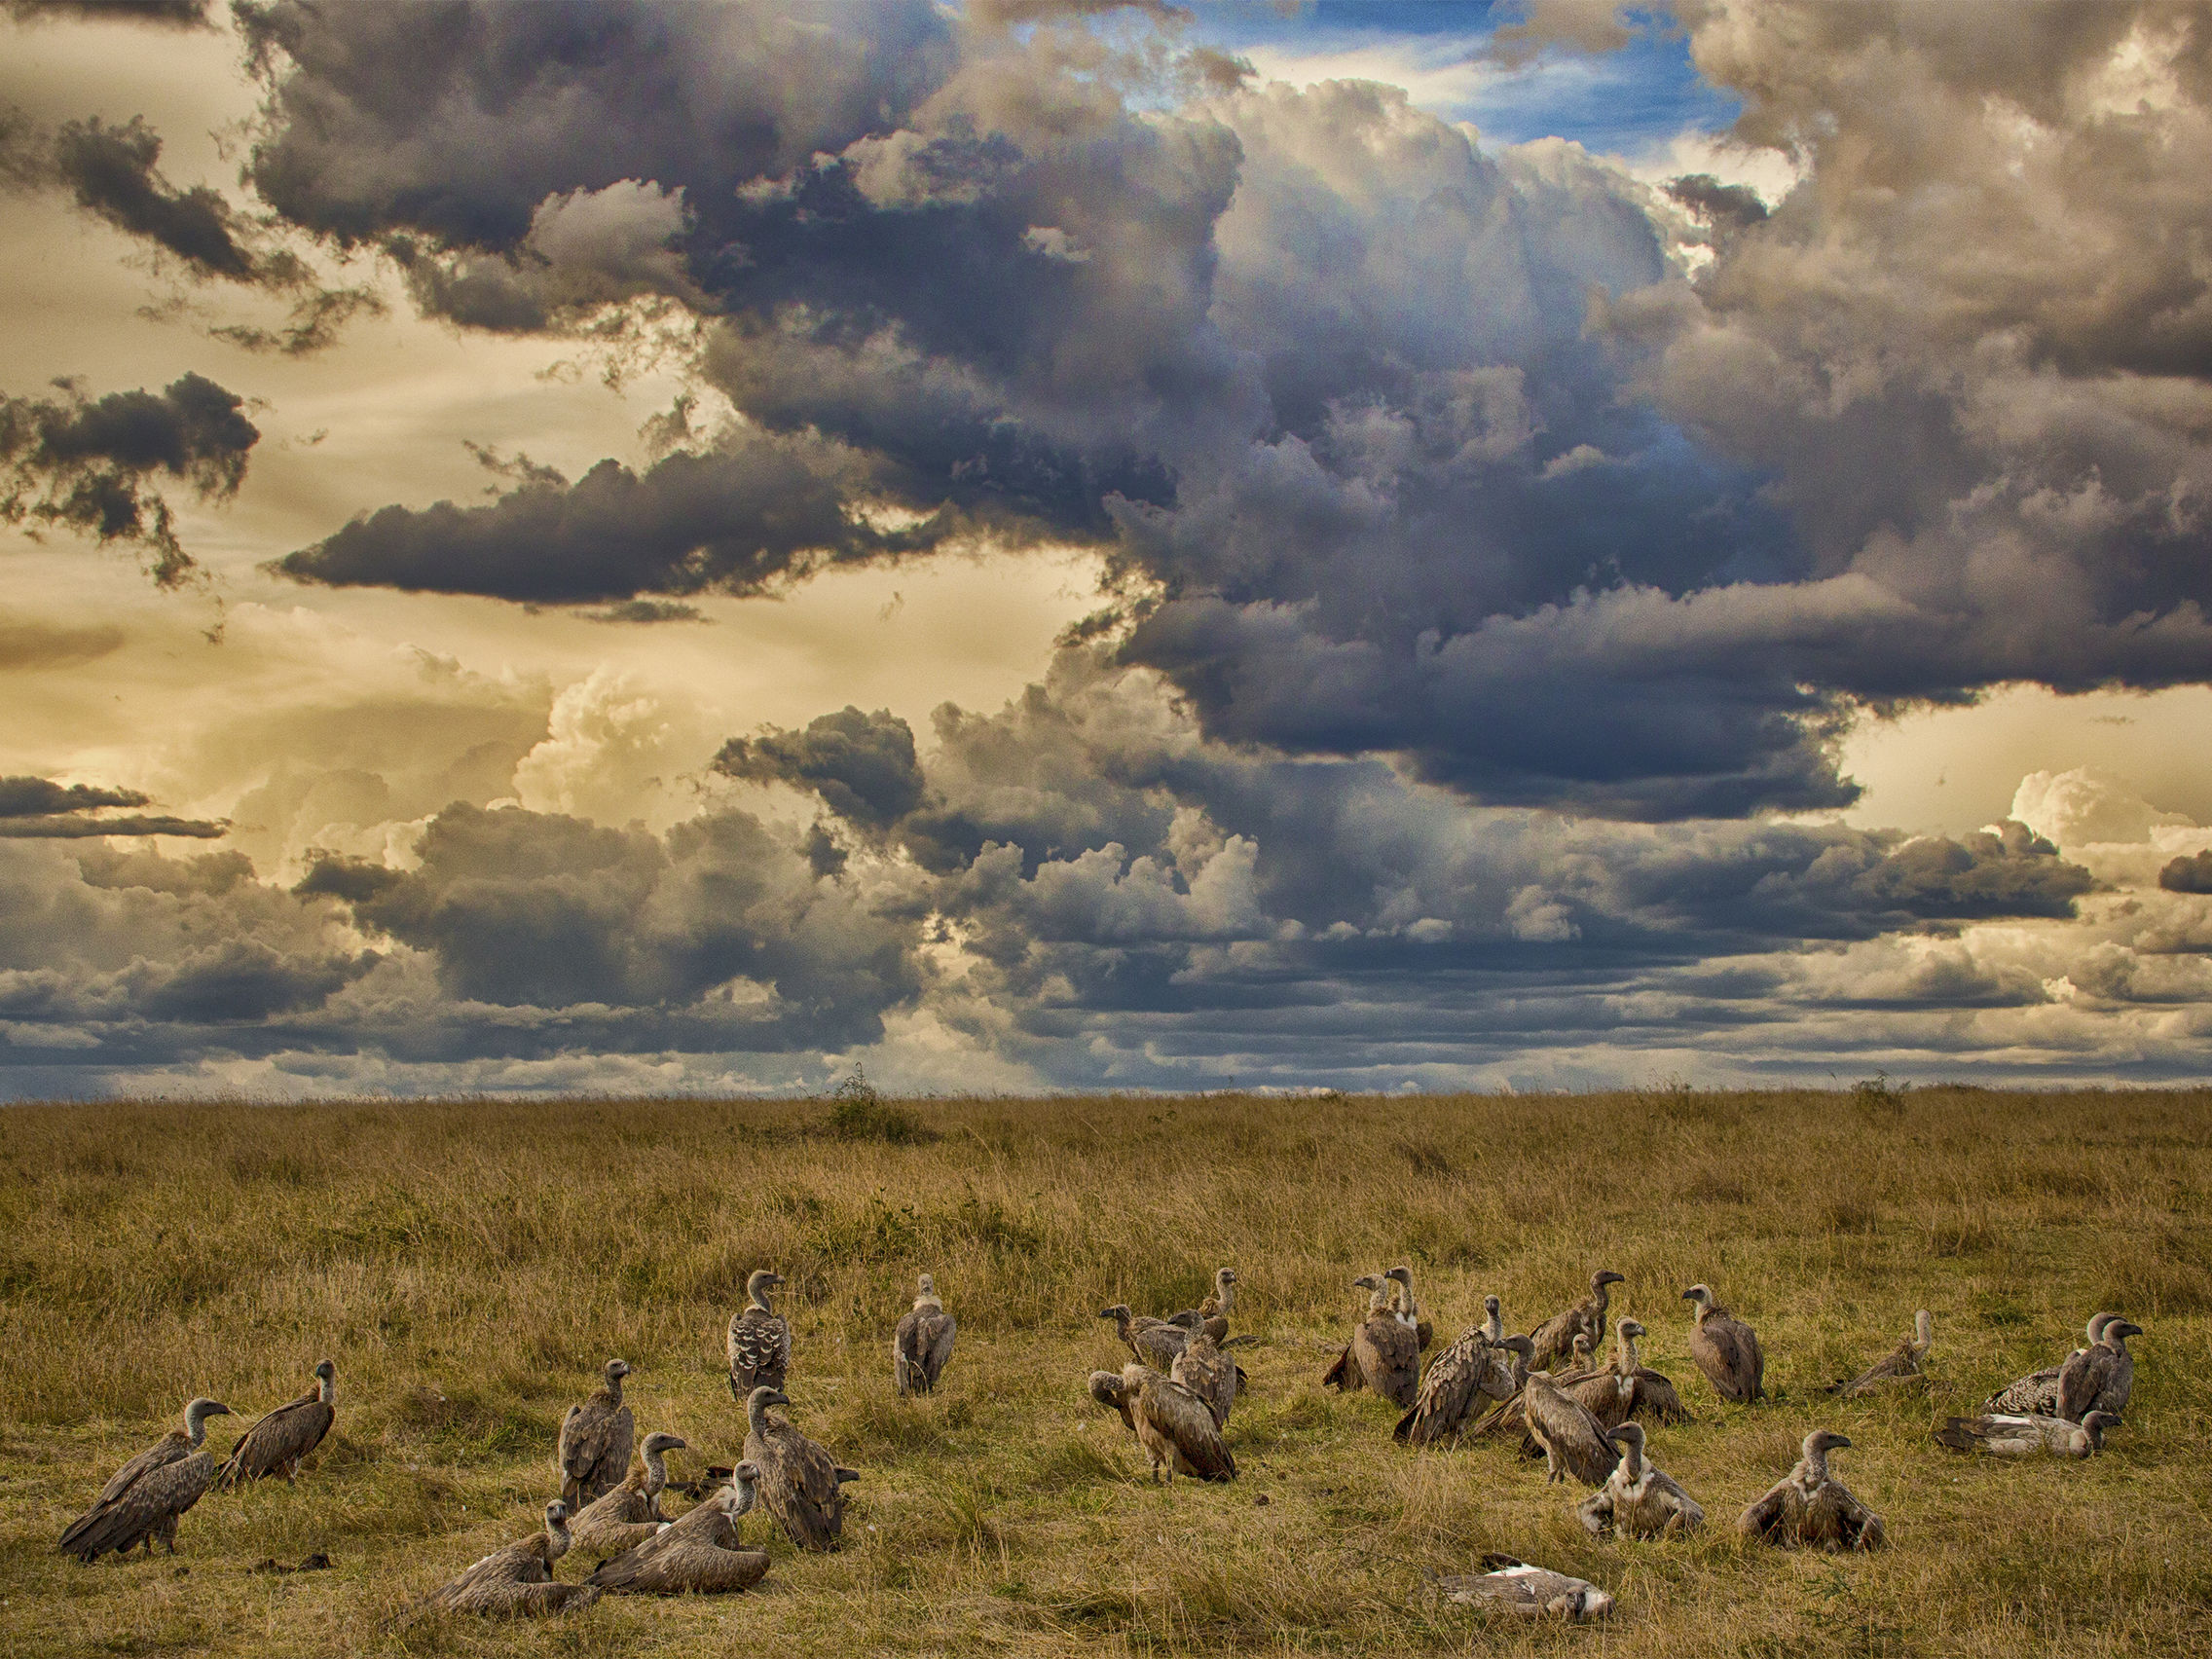 Vultures waiting for their meal...